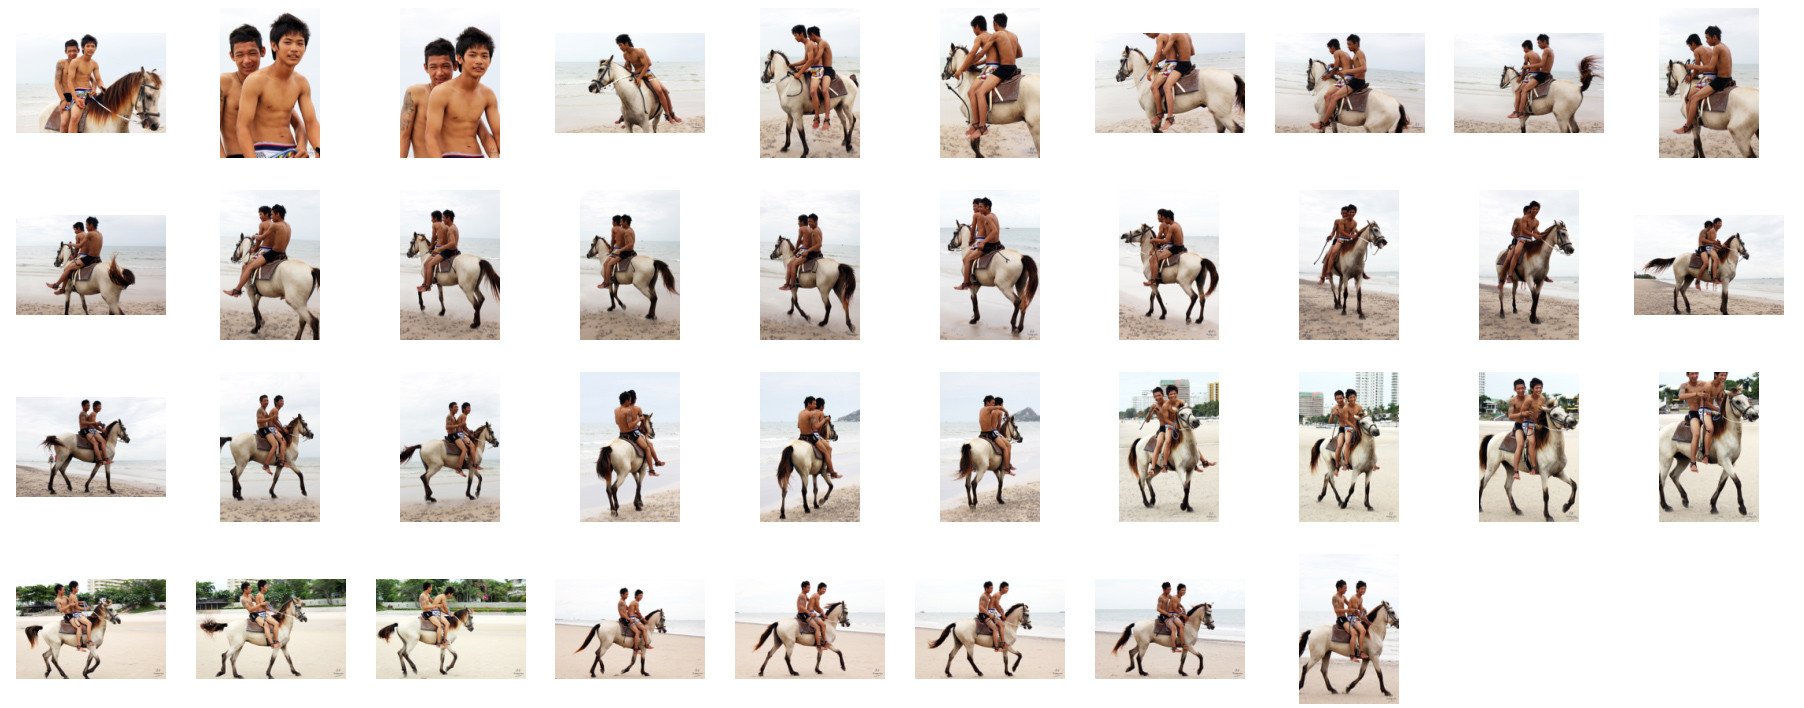 David and Thaksin in Shorts Riding Double with Saddle on Buckskin Horse, Part 7 - Riding.Vision